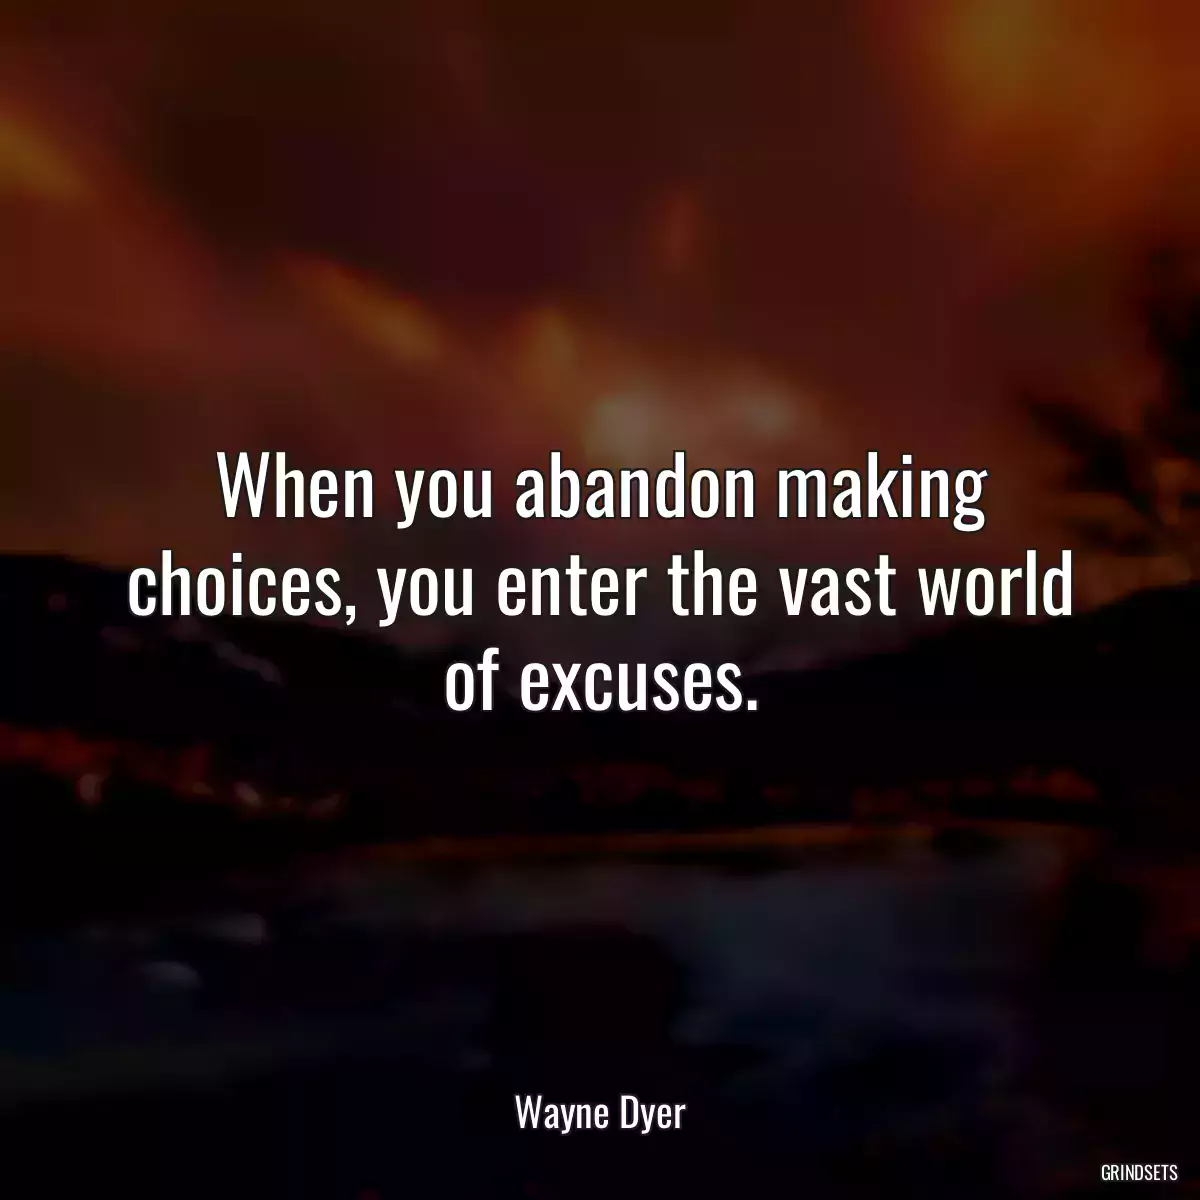 When you abandon making choices, you enter the vast world of excuses.